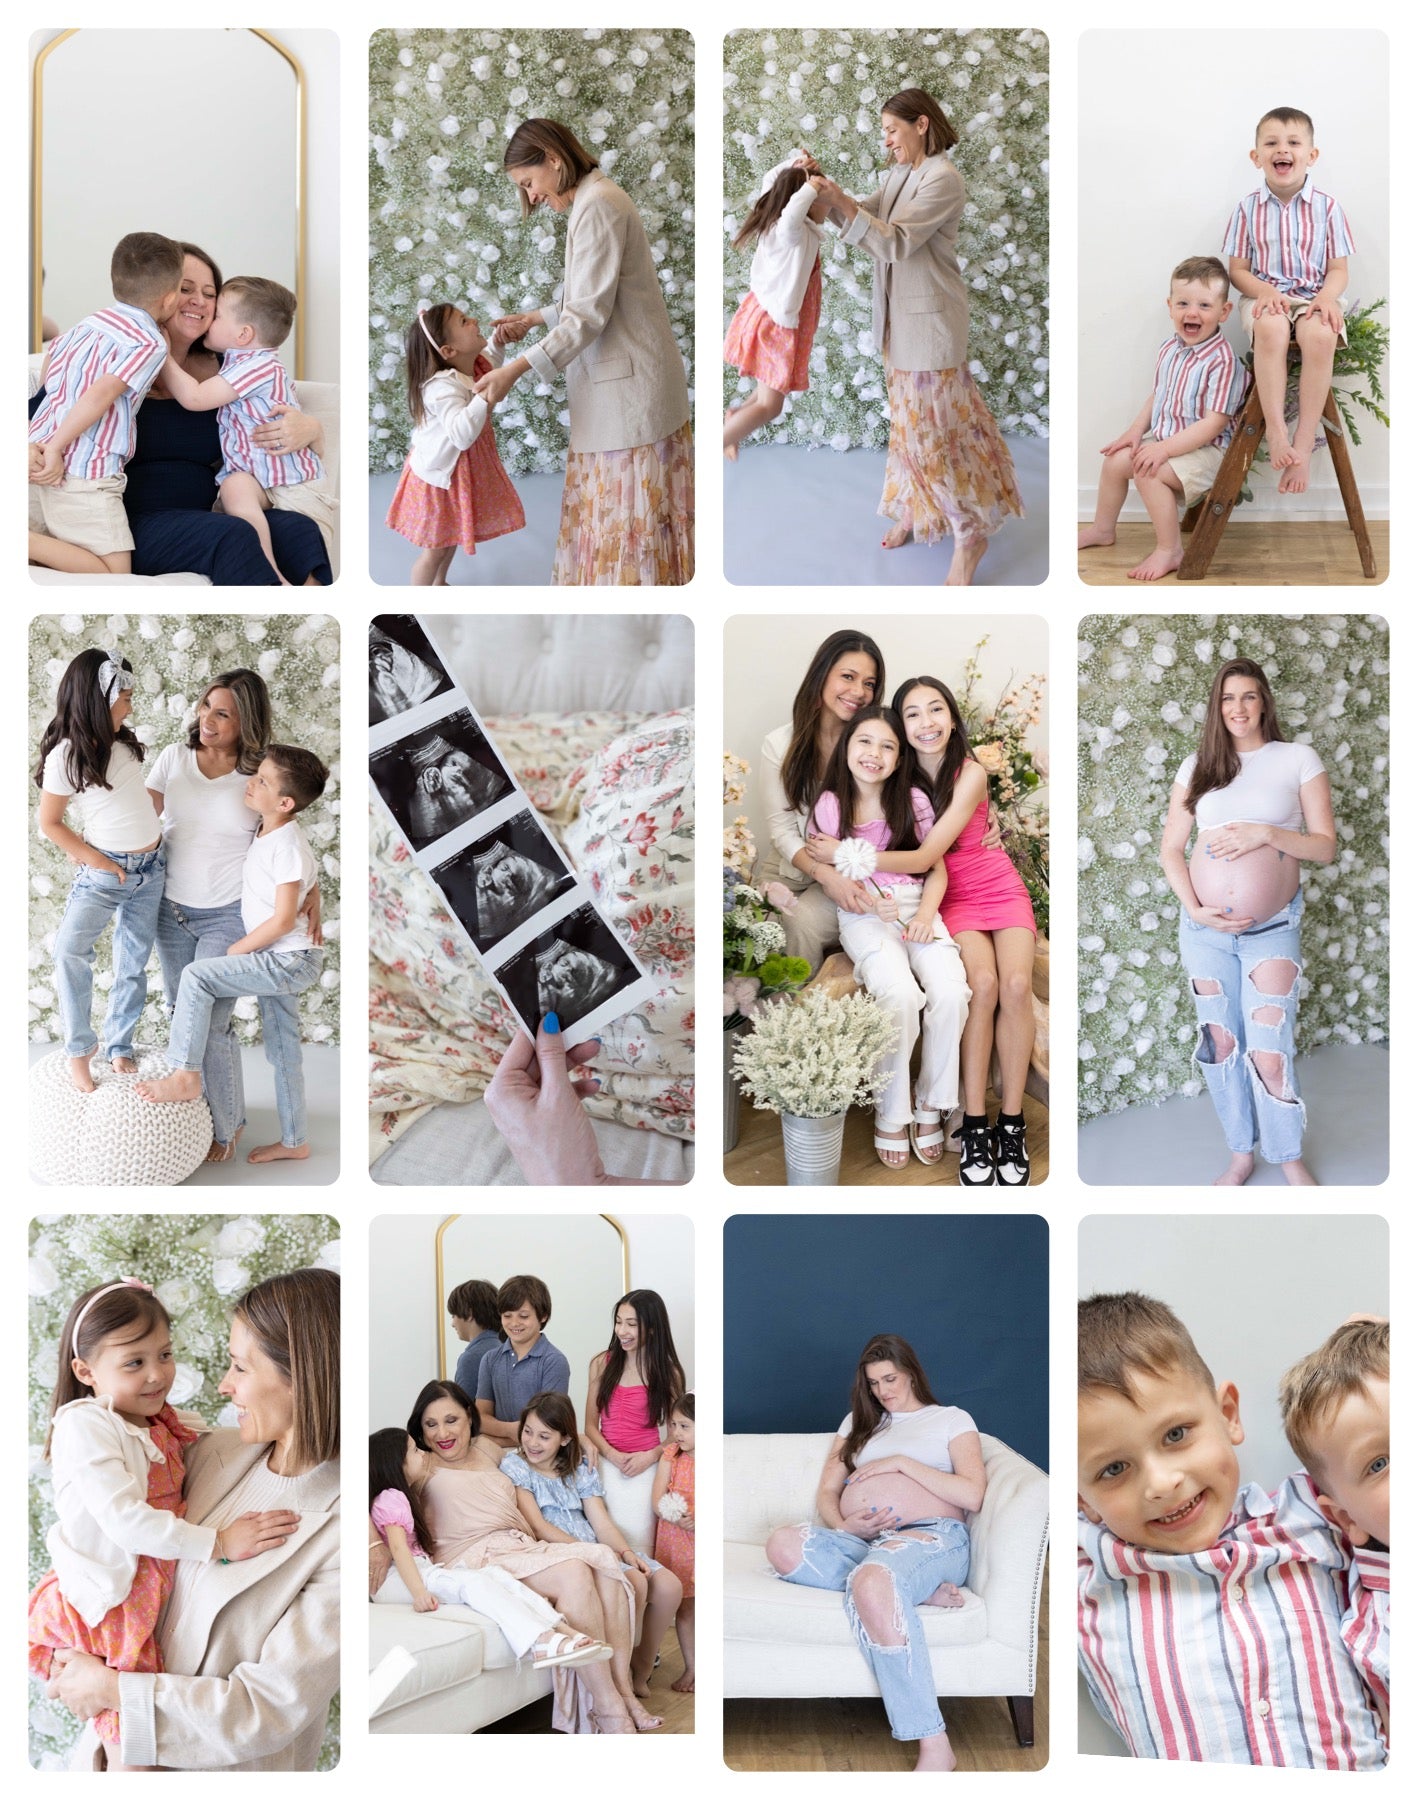 Art of Motherhood Event- a Collaboration with Janelle Brooke Photography - April 28, 2024